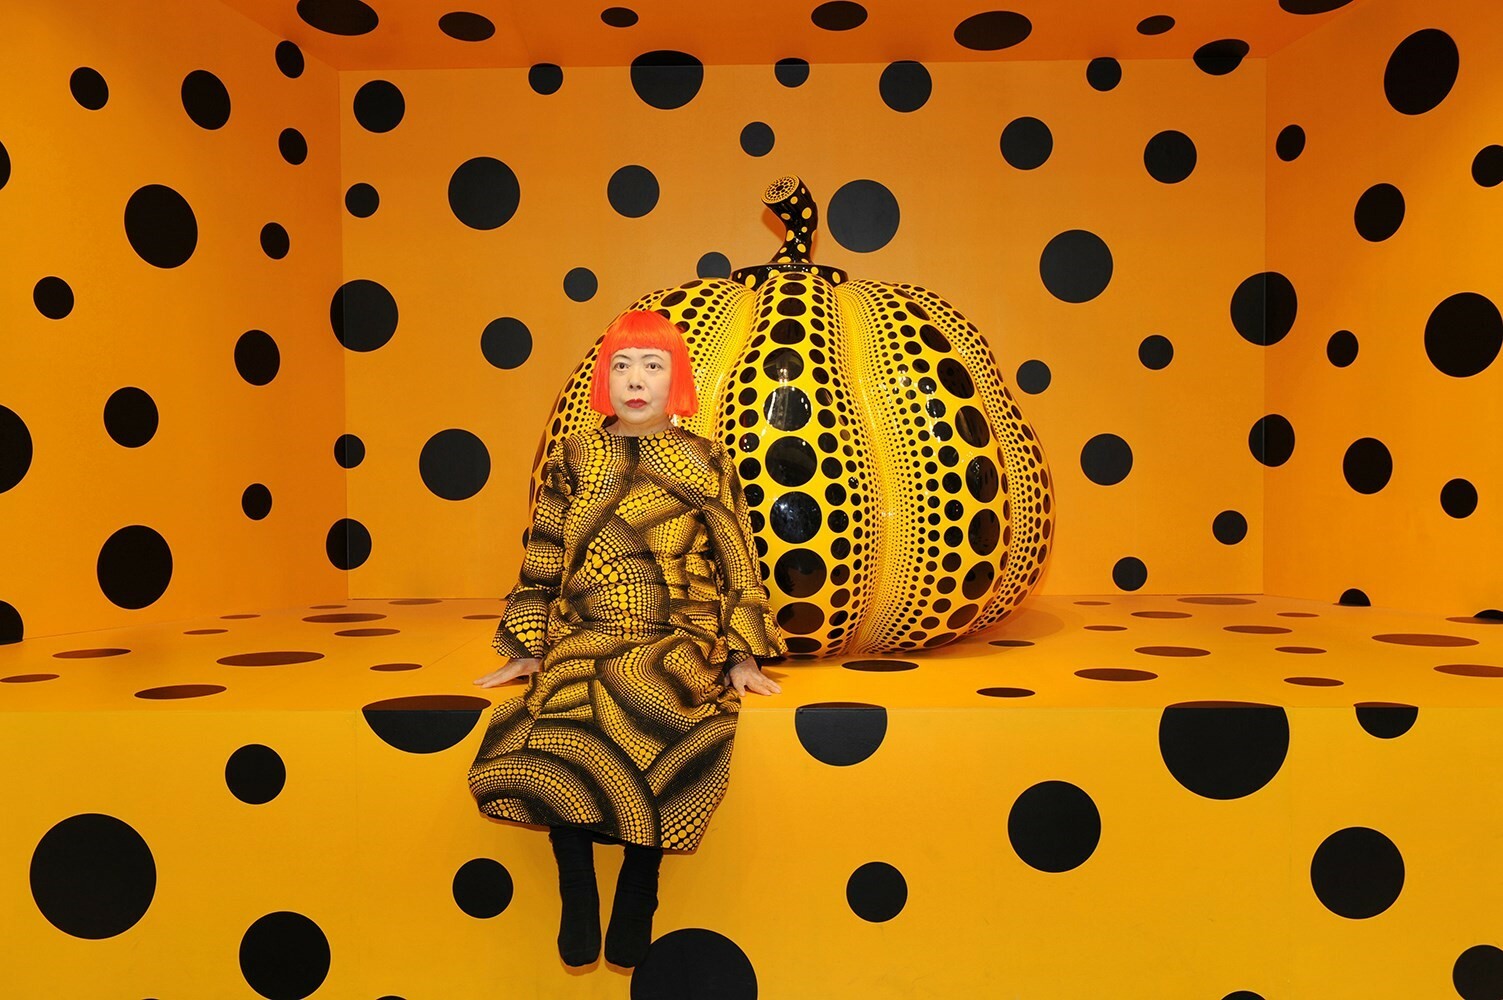 The famous polka dots of Yayoi Kusama are all over Louis Vuitton stores  around the world